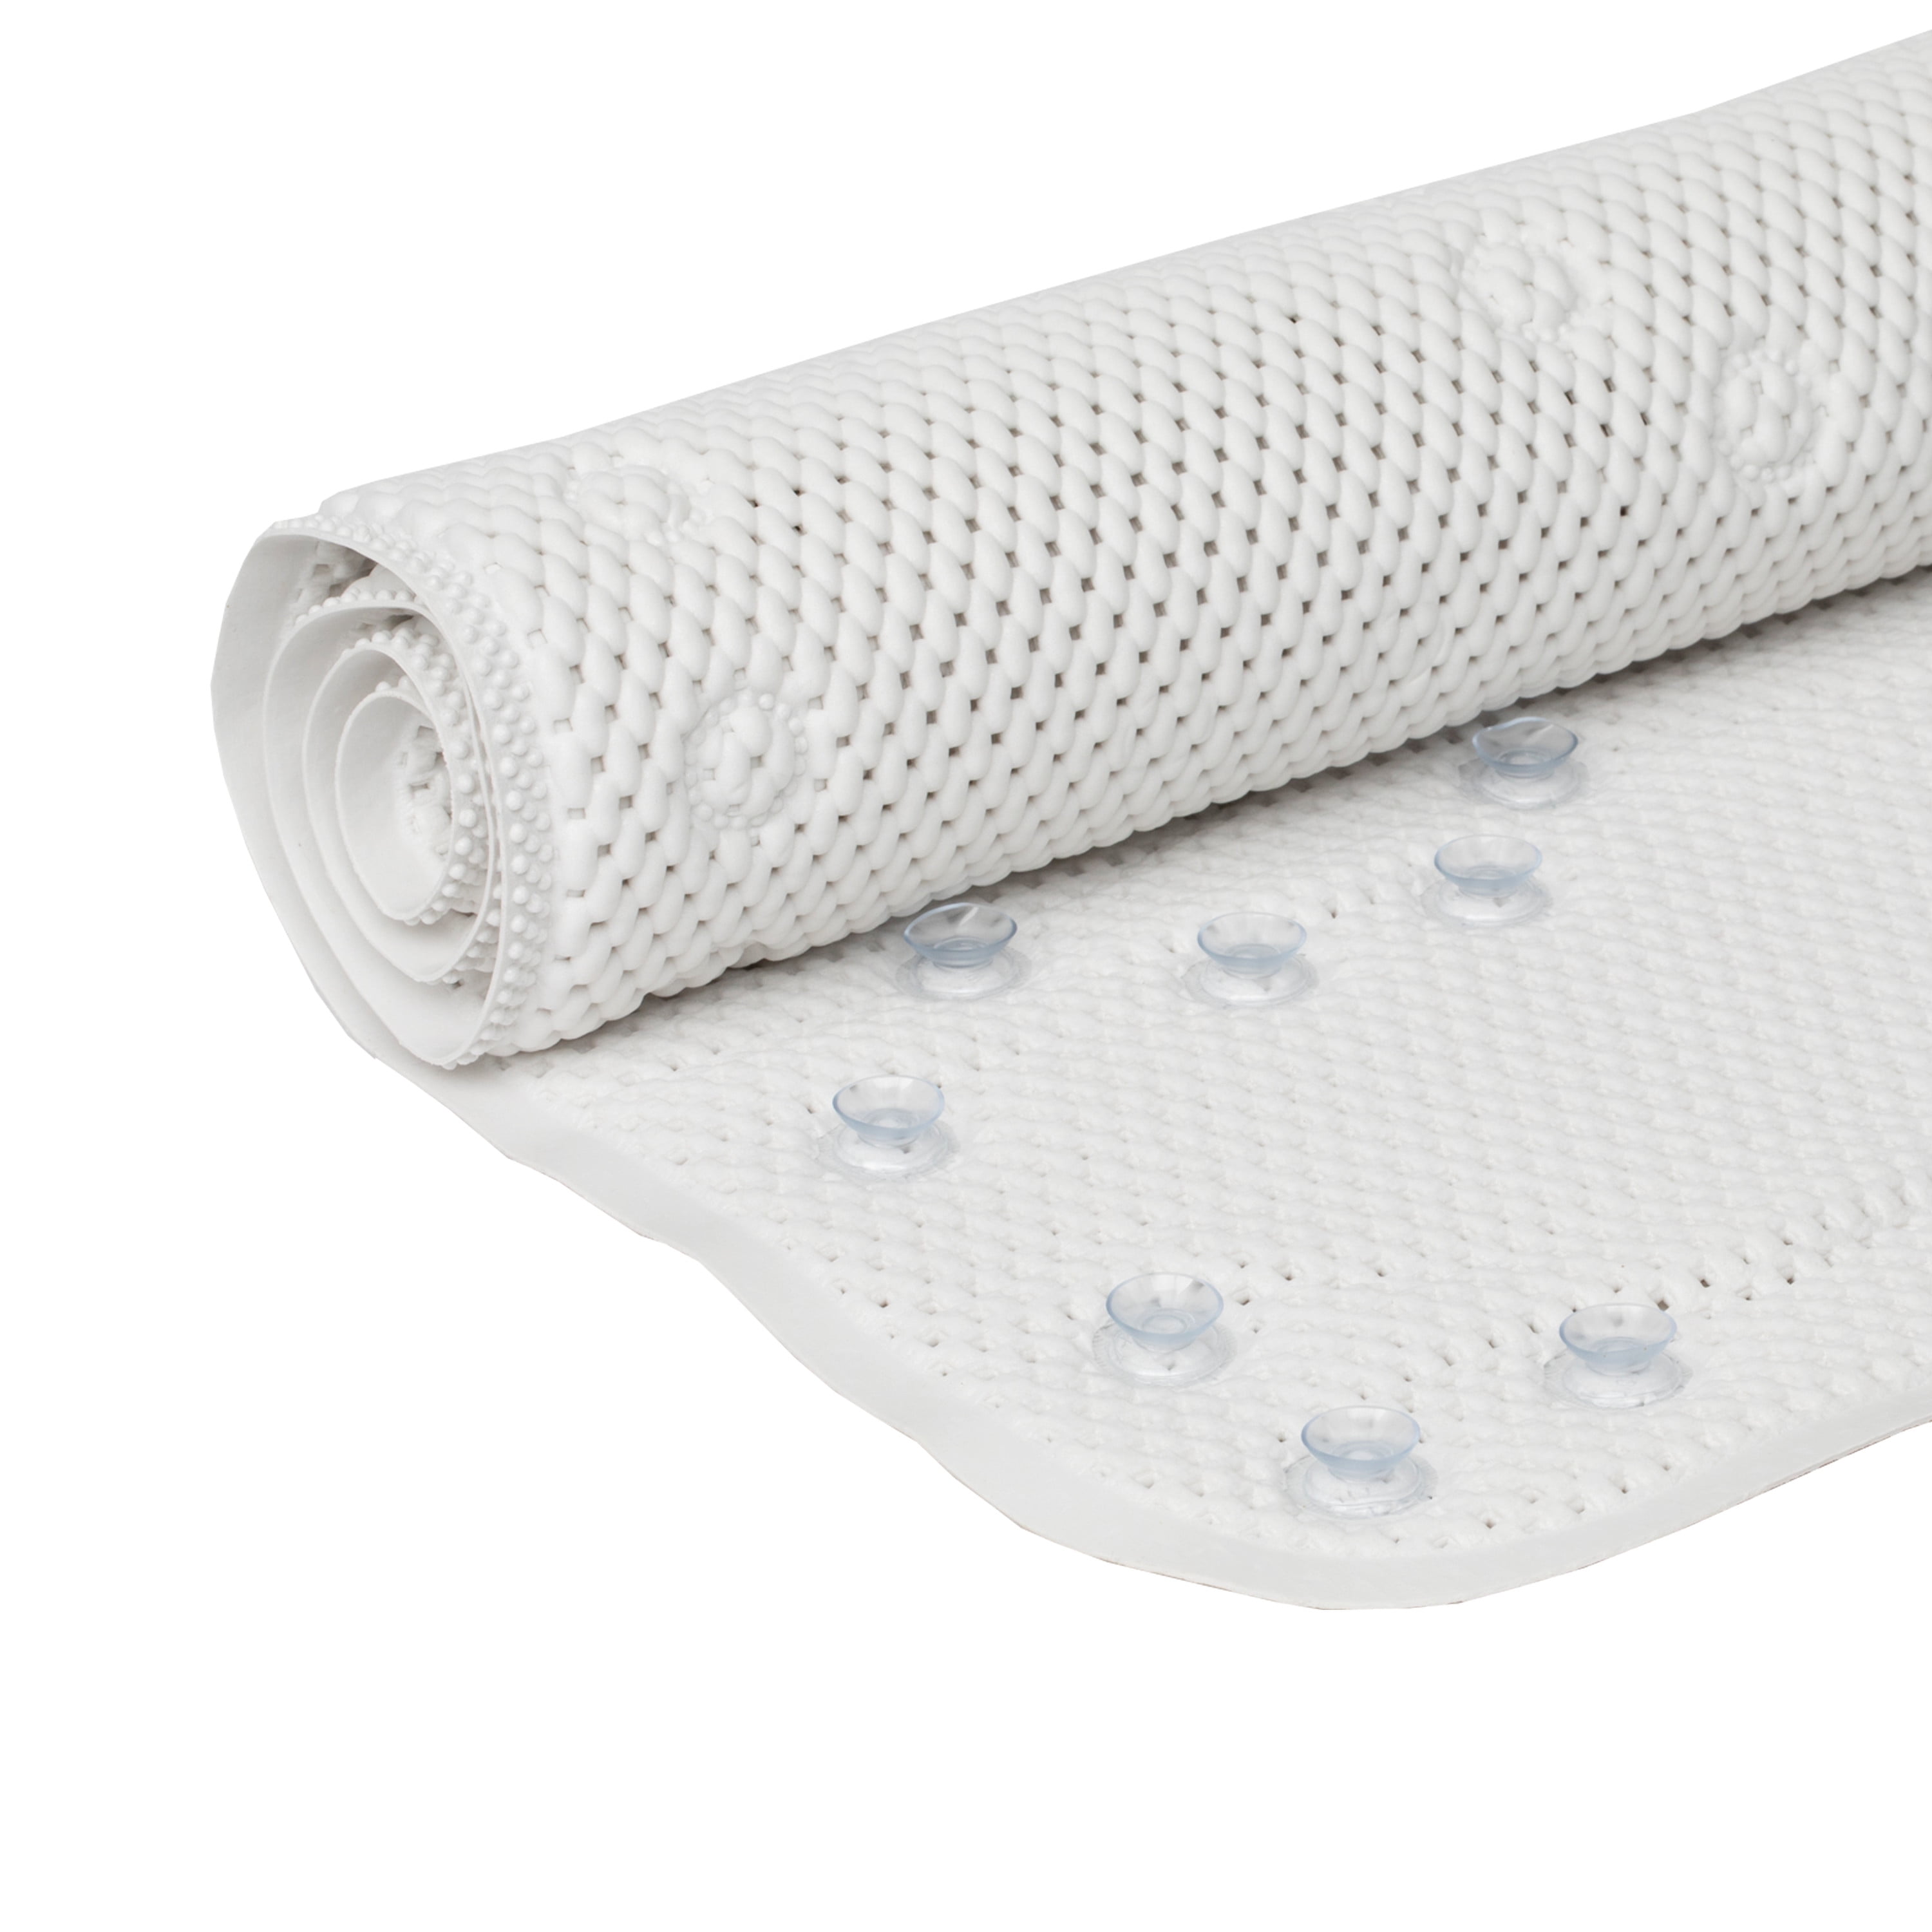 Duck Brand White Extra-Soft Bath Tub Mat, 17 in. x 40 in.